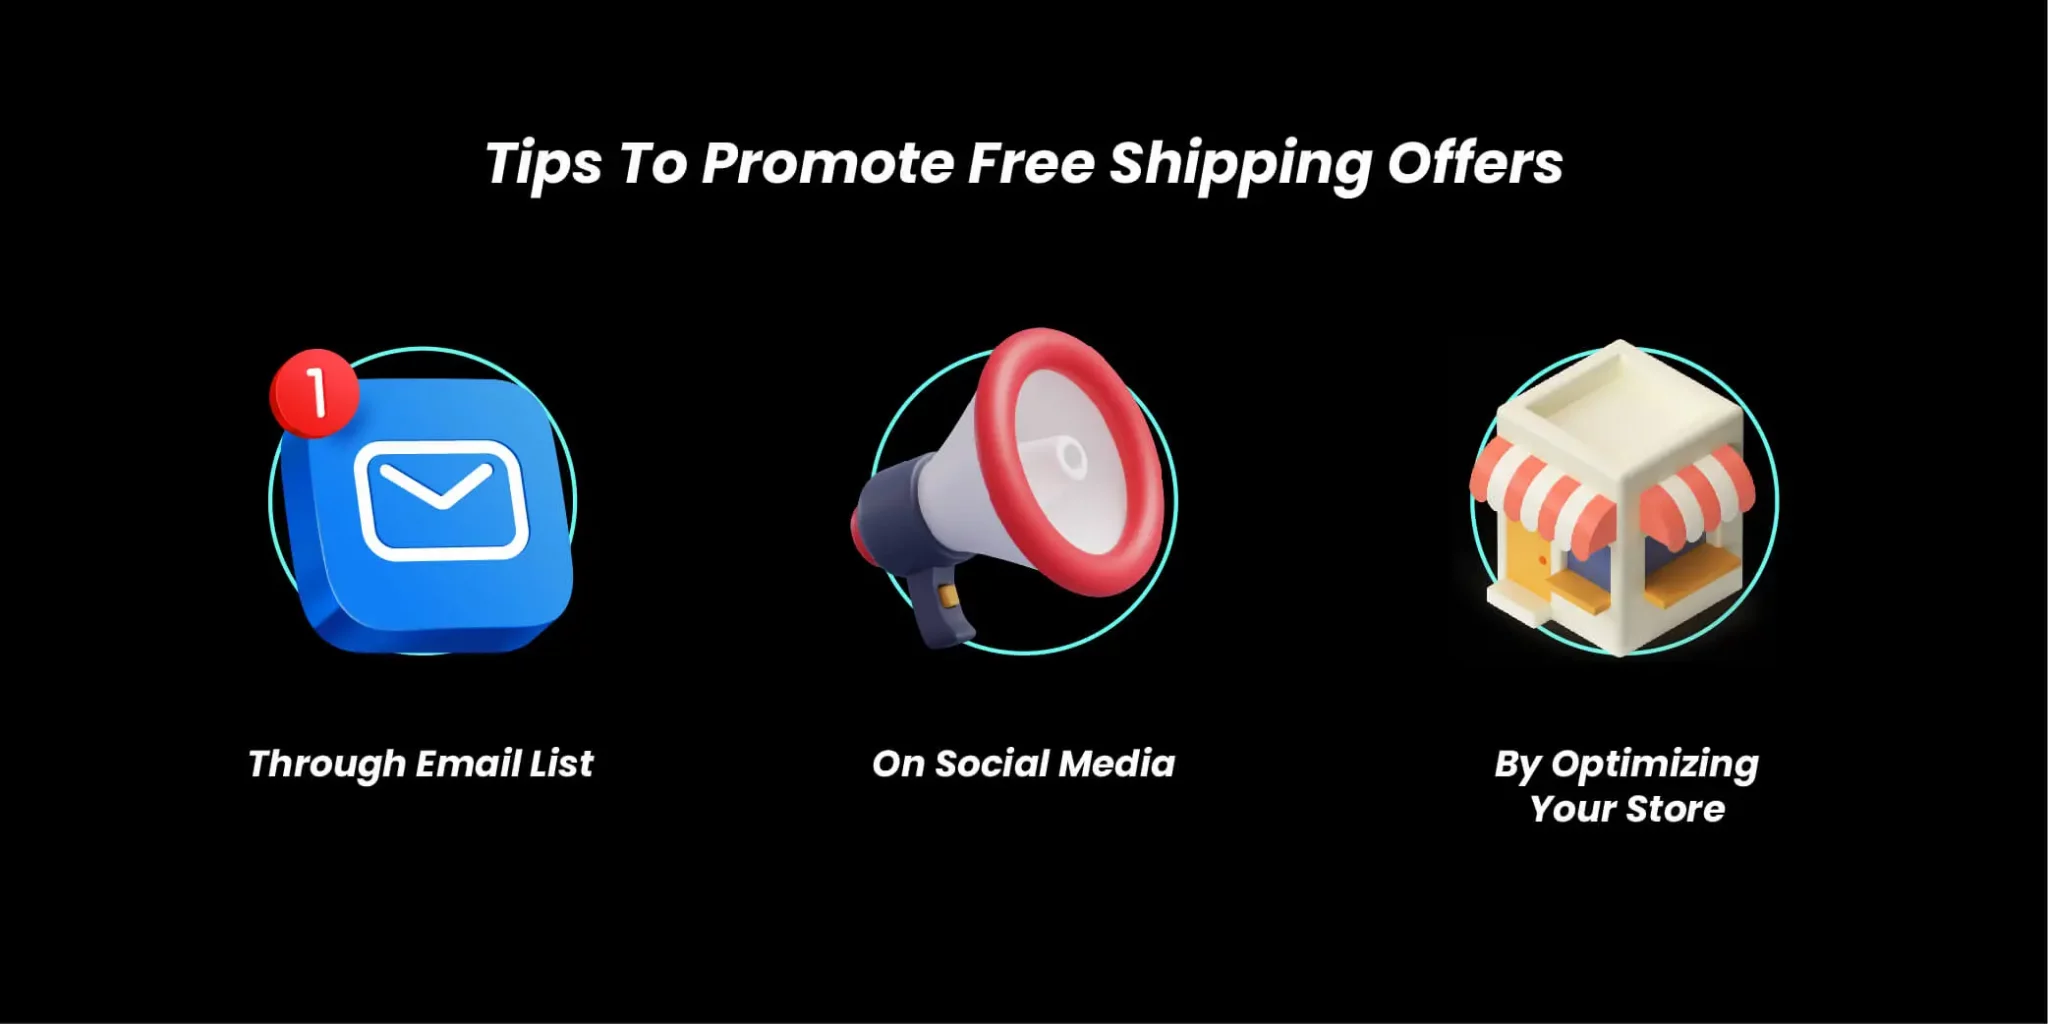 Tips to promote free shipping offers